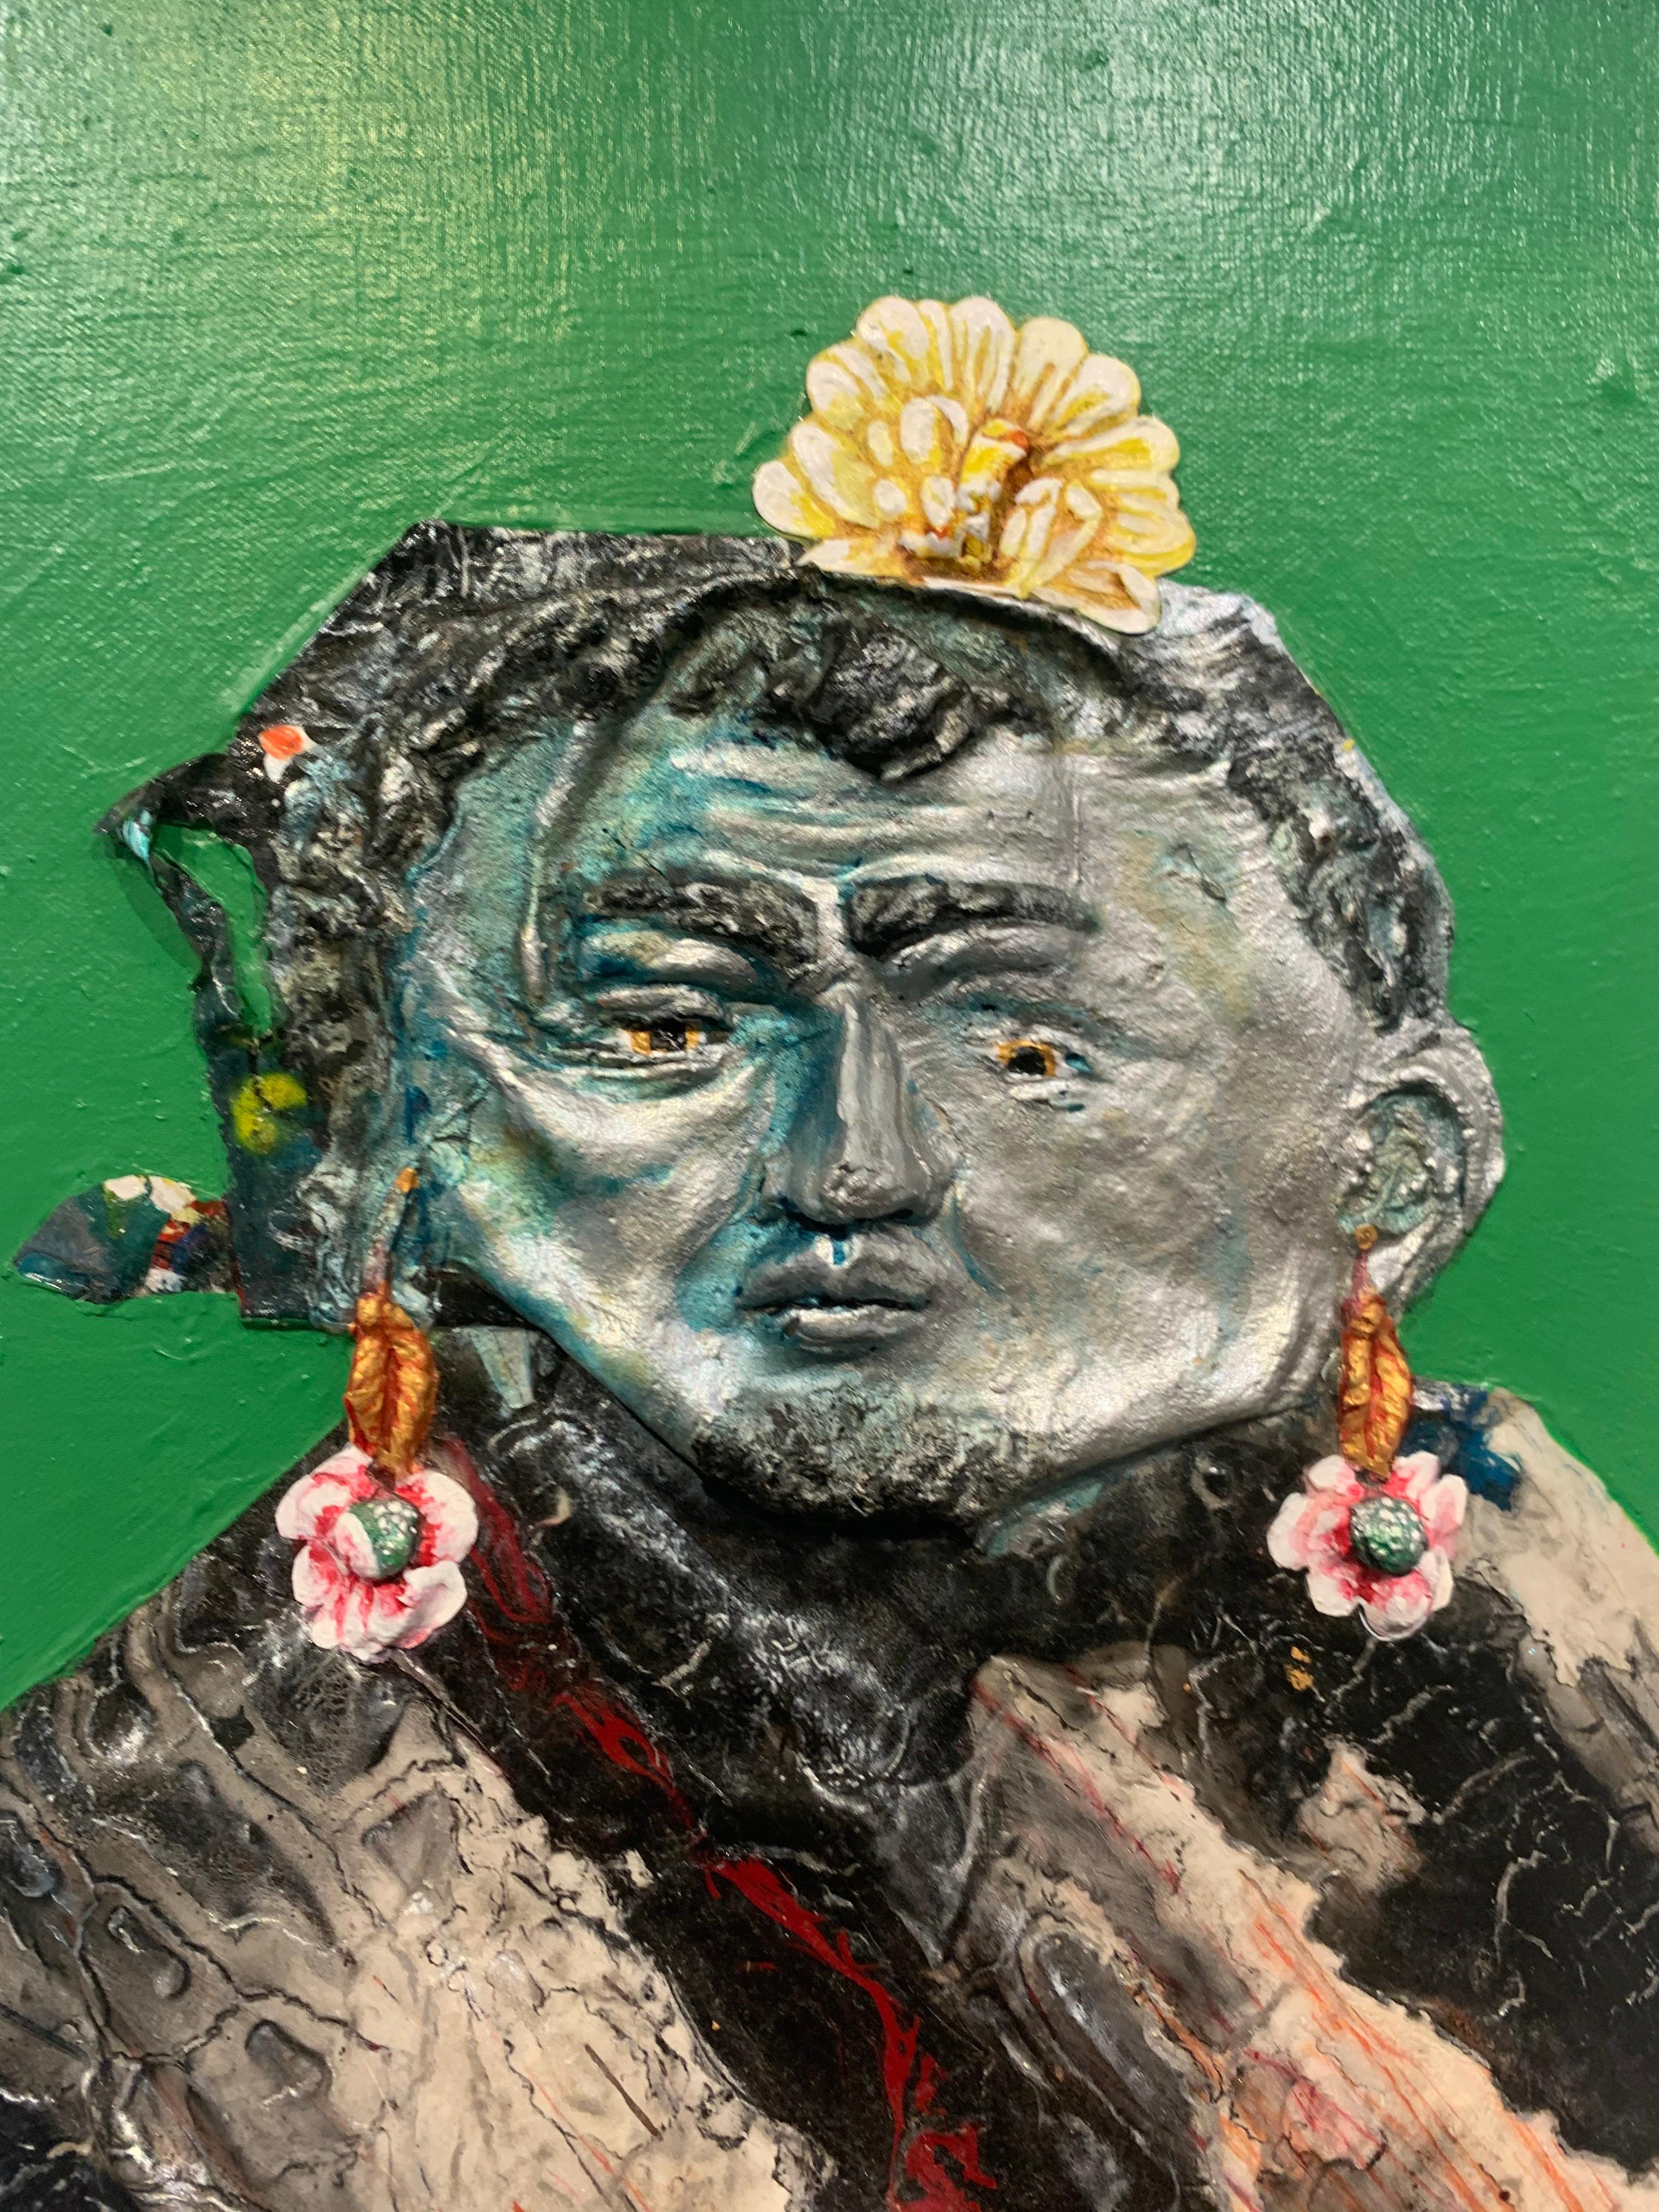 Shaman, acrylic and mixed media painting by artist Ben Darby. The artists has used a draping effect to create a 3D effect with the garment. The rest of the painting is textured and is embellished with flowers and iridescent paint.